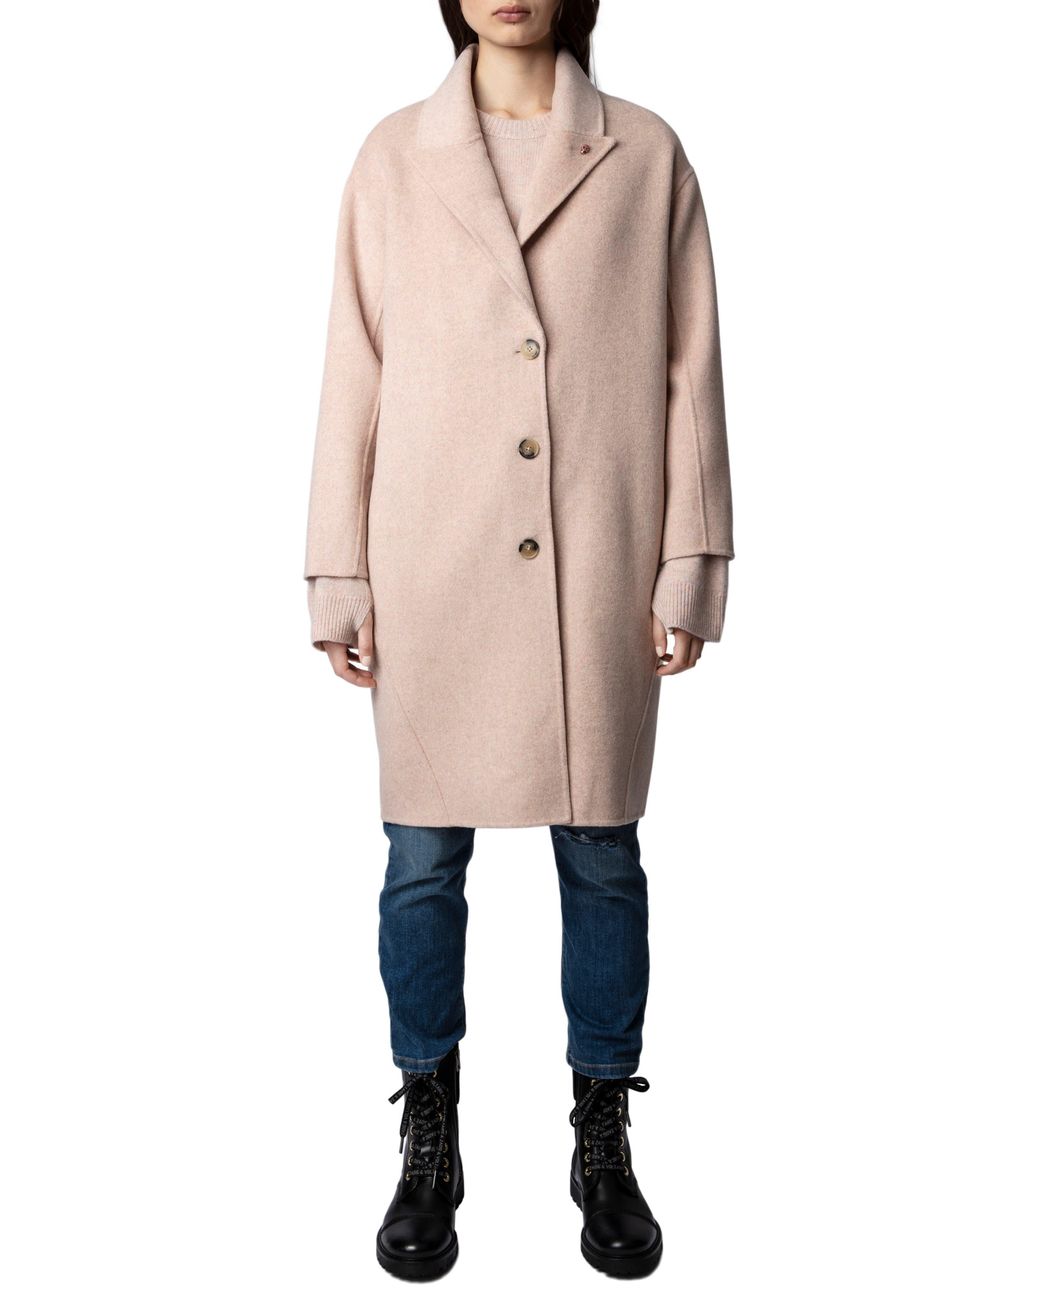 Zadig & Voltaire Mady Wool & Cashmere Blend Coat in Natural | Lyst